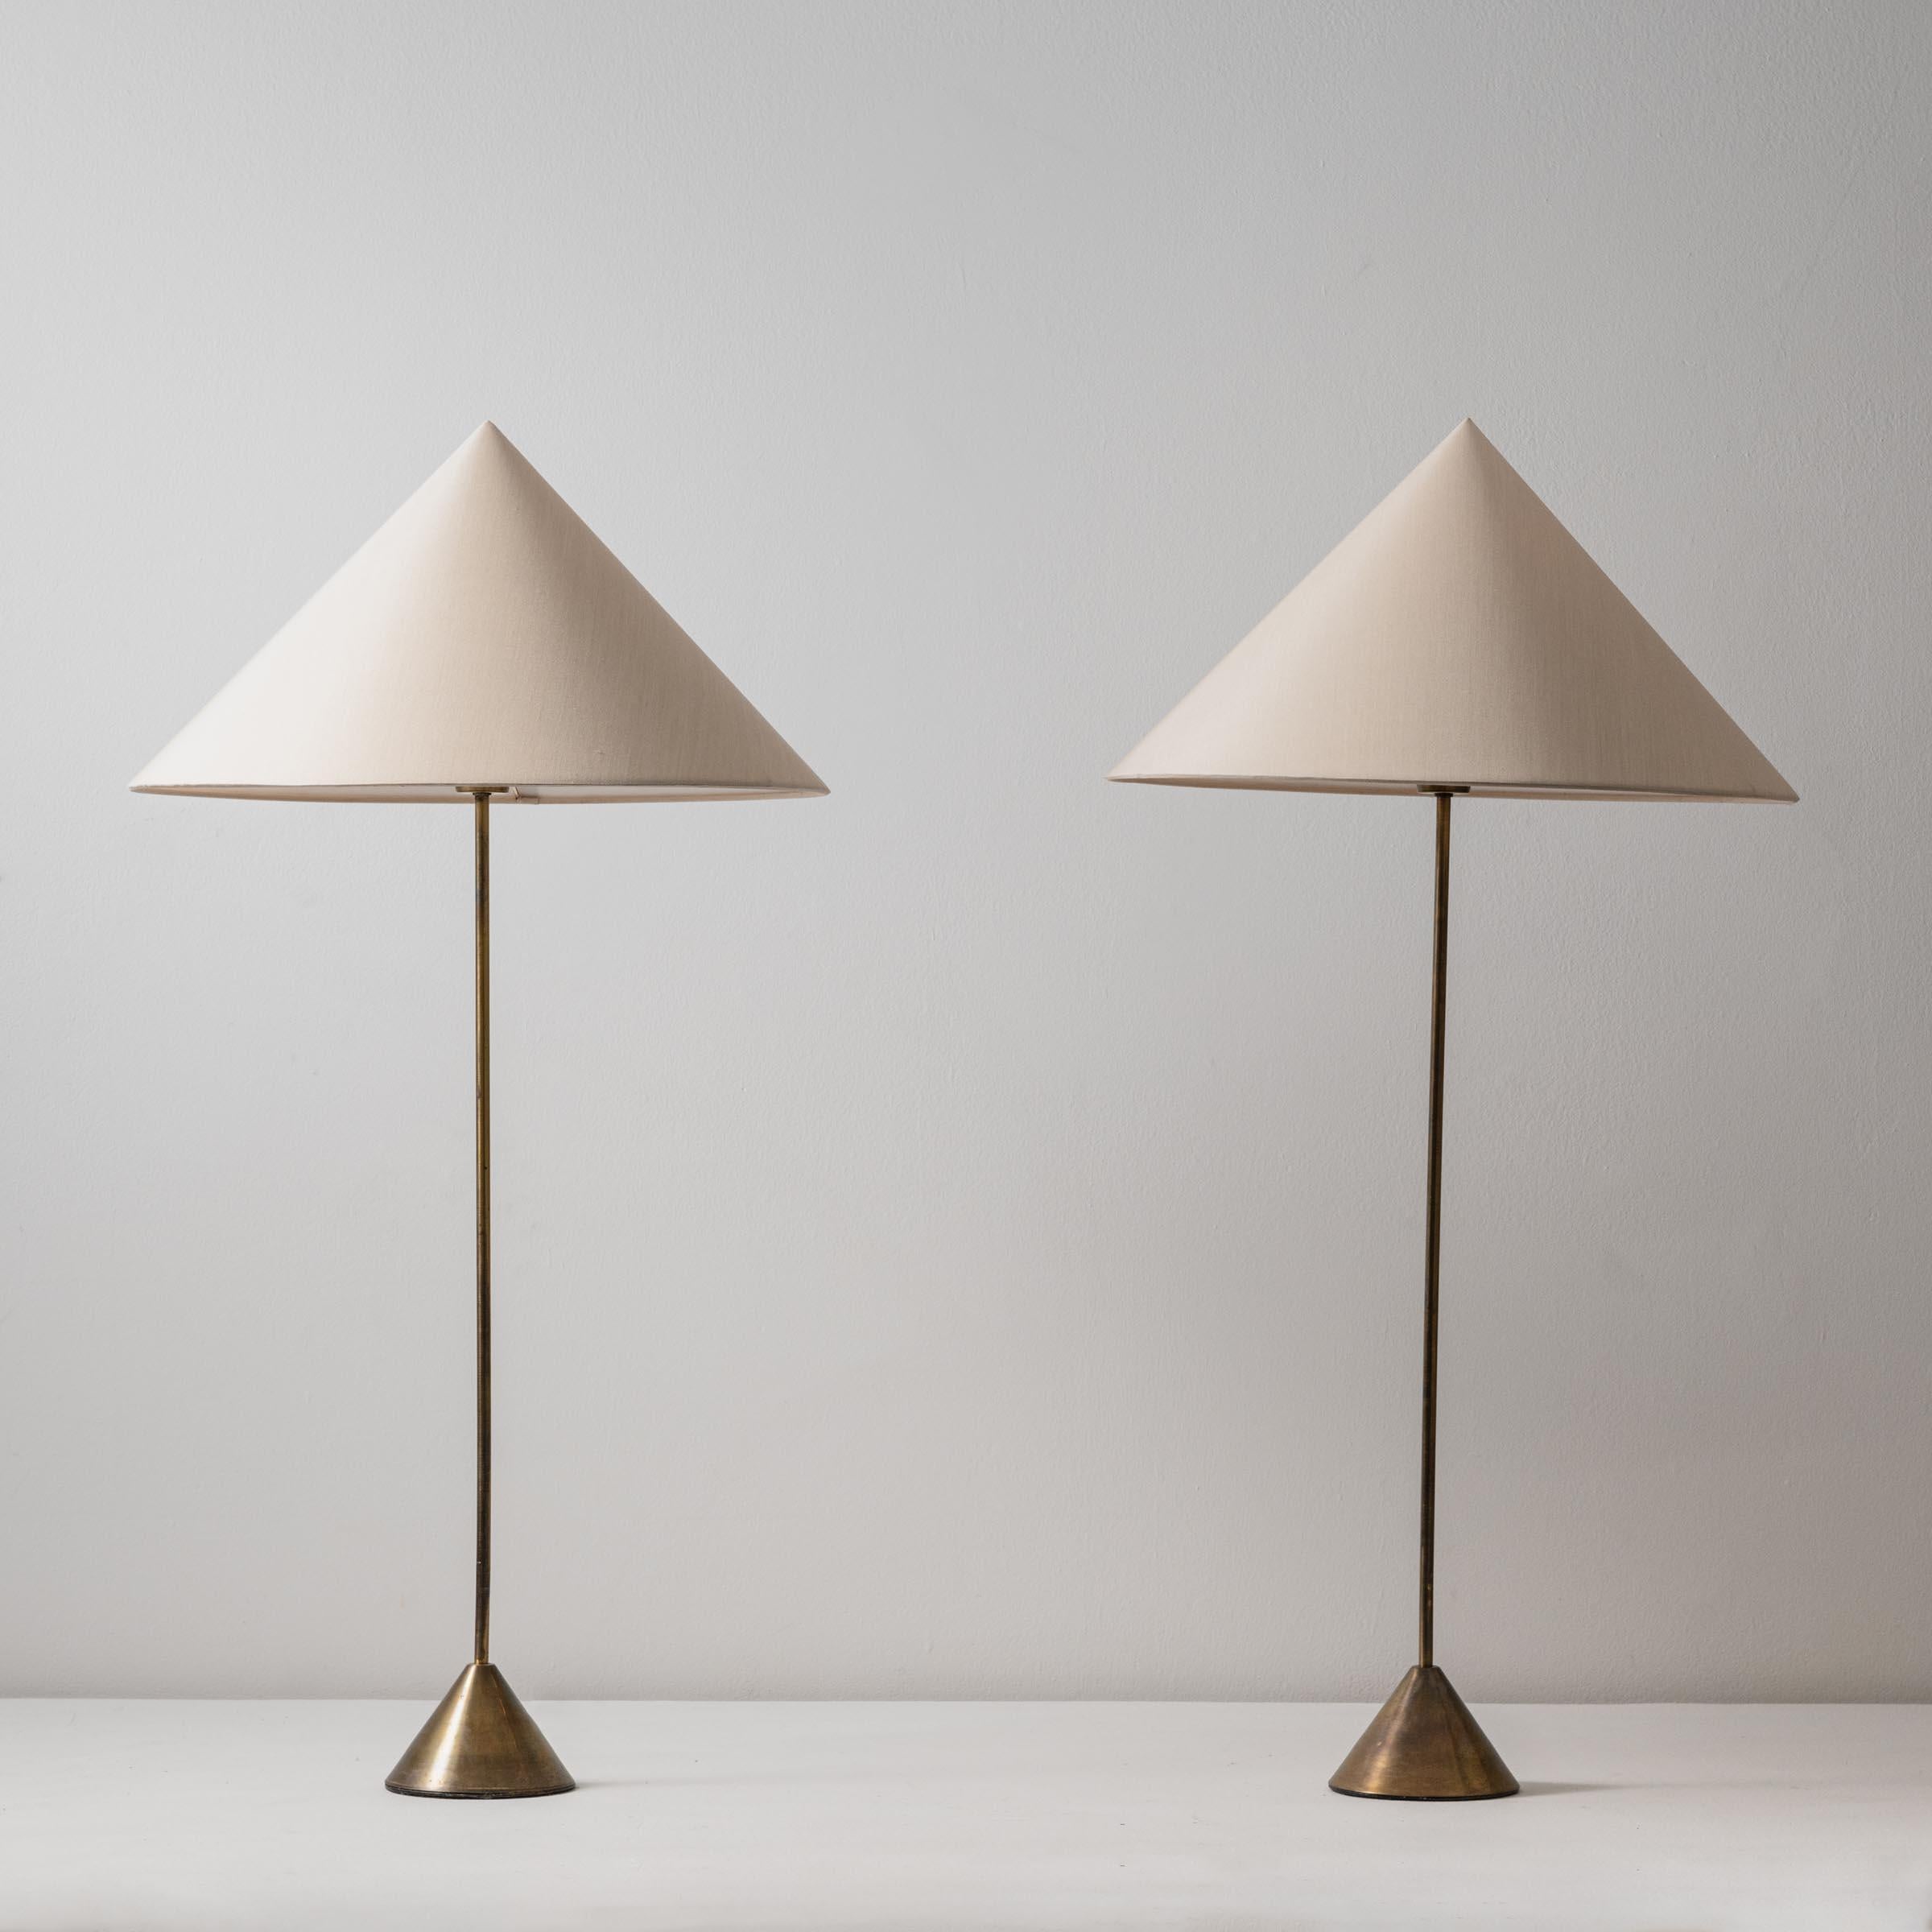 Pair of Swedish table lamps by Swedish lighting manufacturer ASEA. Silk shades, brass stem. Manufacturer's label engraved on socket. 120v rewired with US plug. We recommend one E27 socket. 60w Bulbs not provided. Measures: shade height: 10